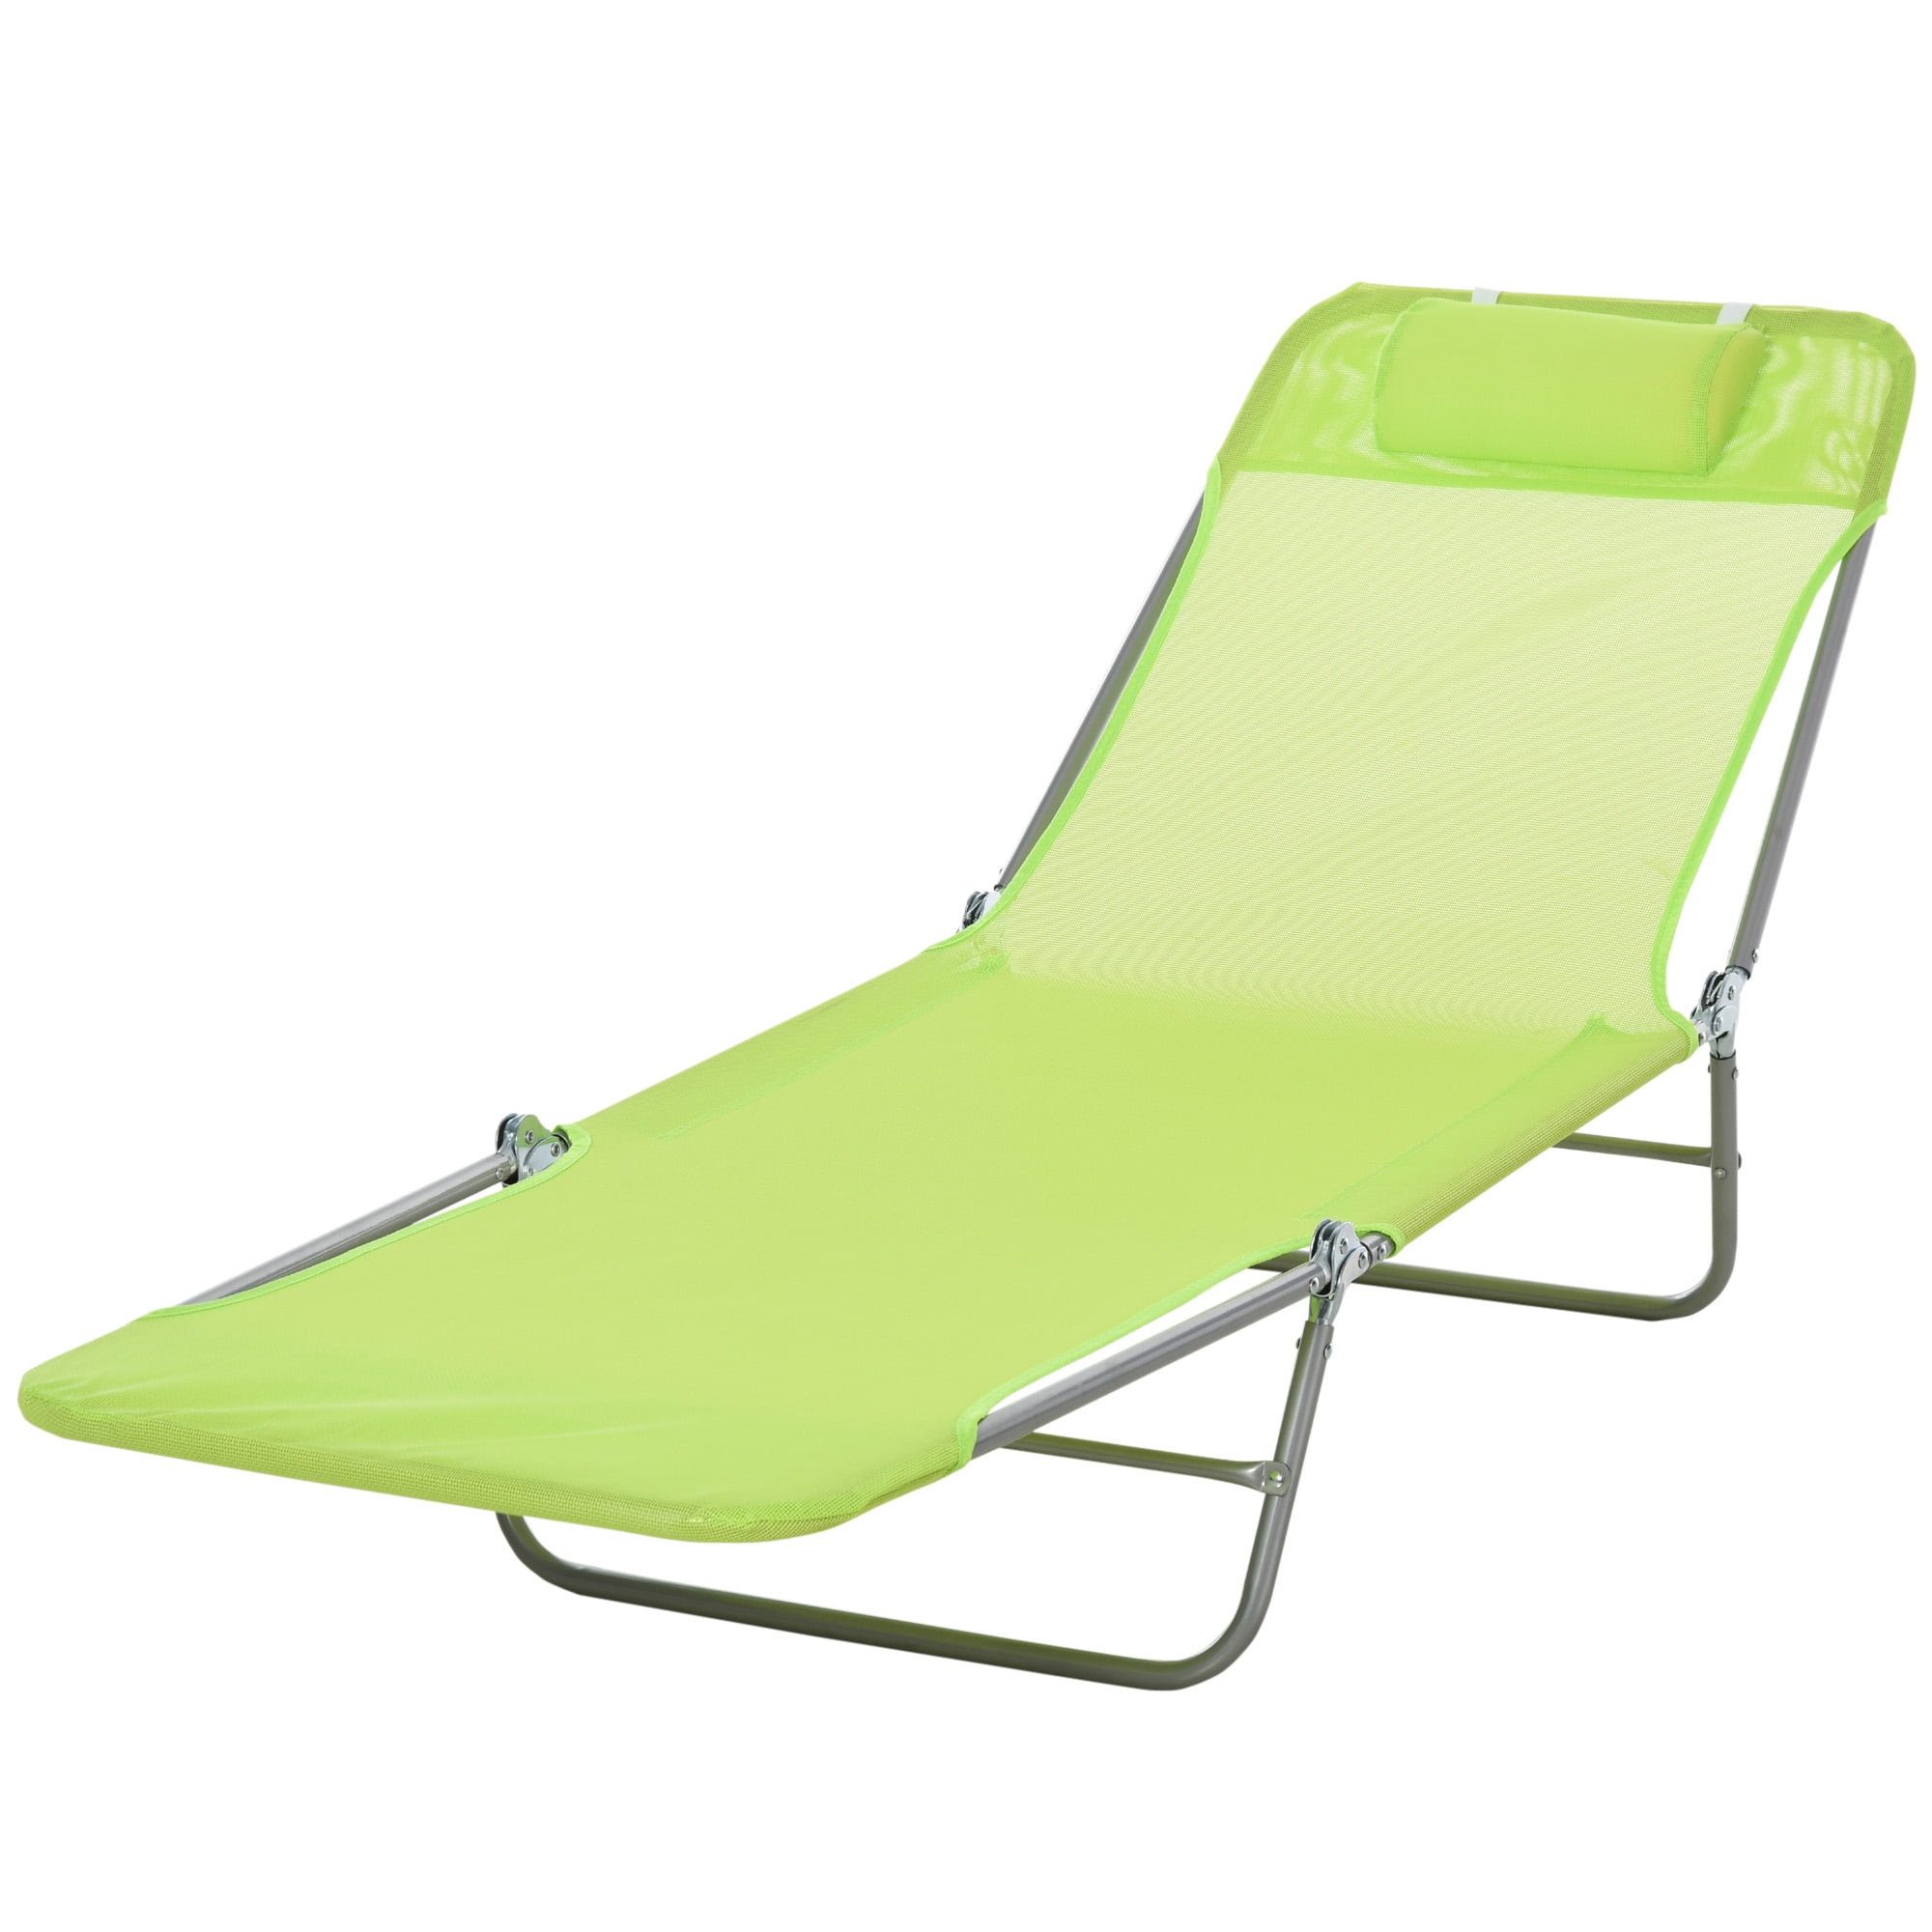 Modern Outsunny Beach Sun Adjustable Reclining Lounge Chair for Small Space